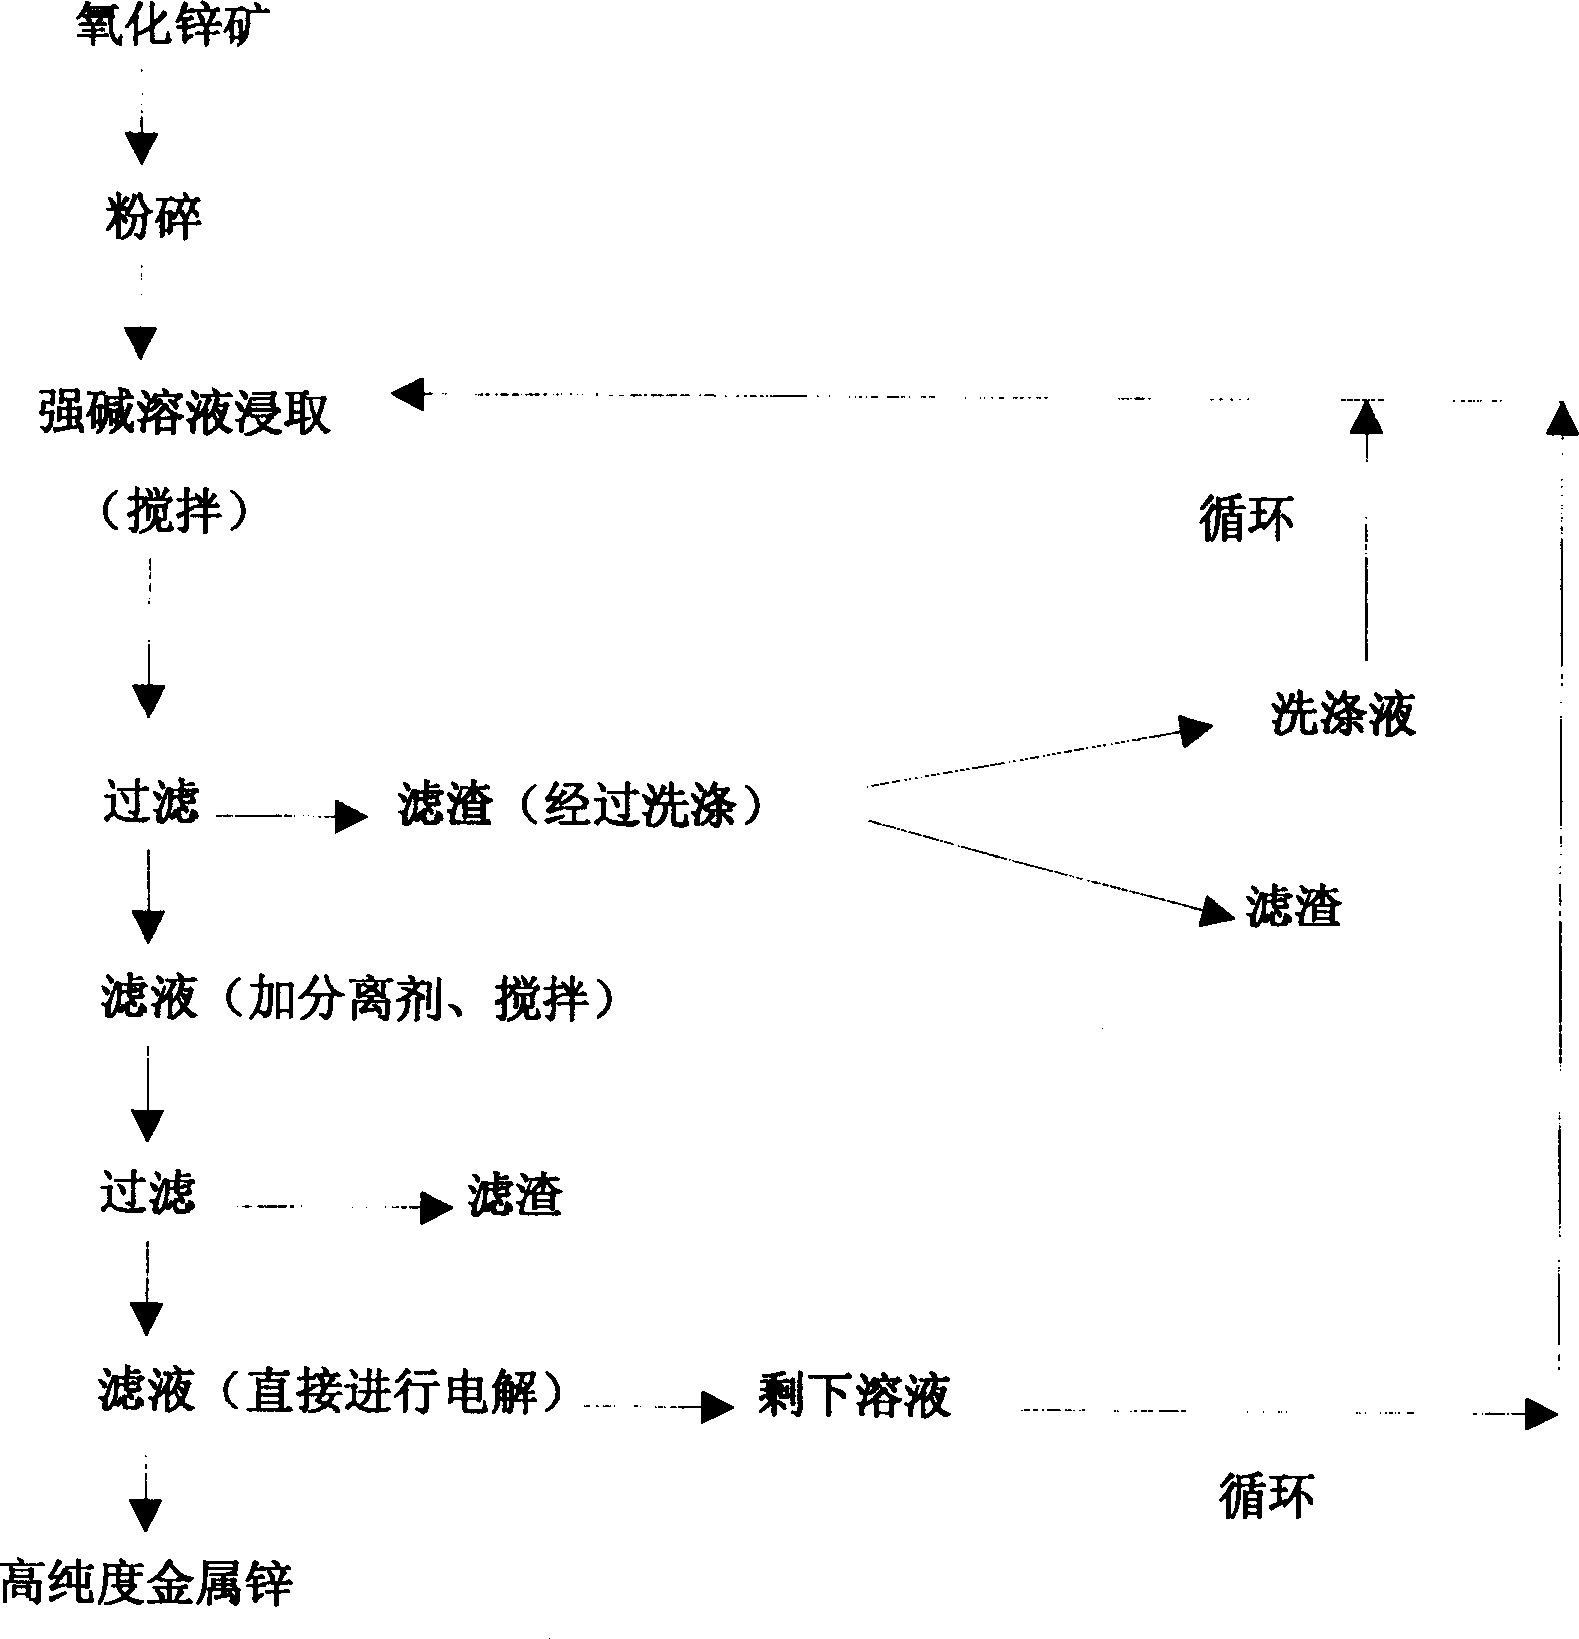 Method for producing high purity metal zinc from zinc oxide ore